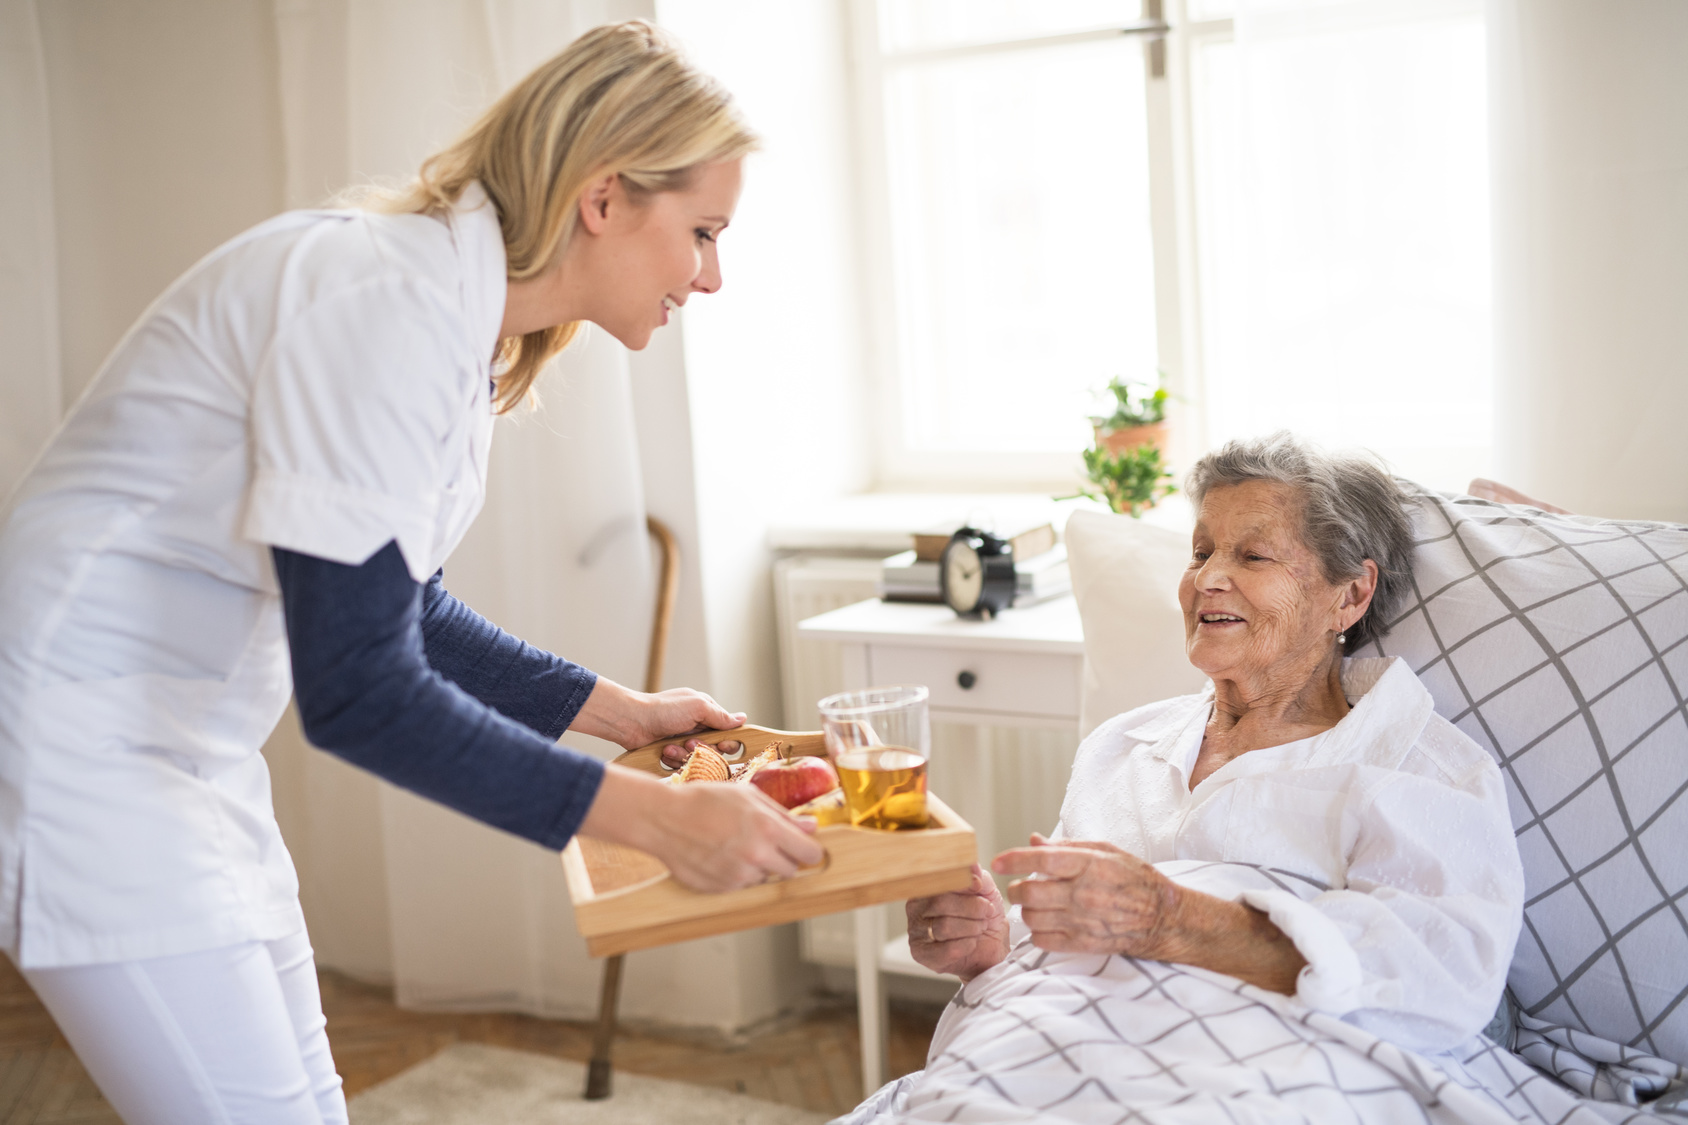 Elderly Care Services near Downers Grove IL